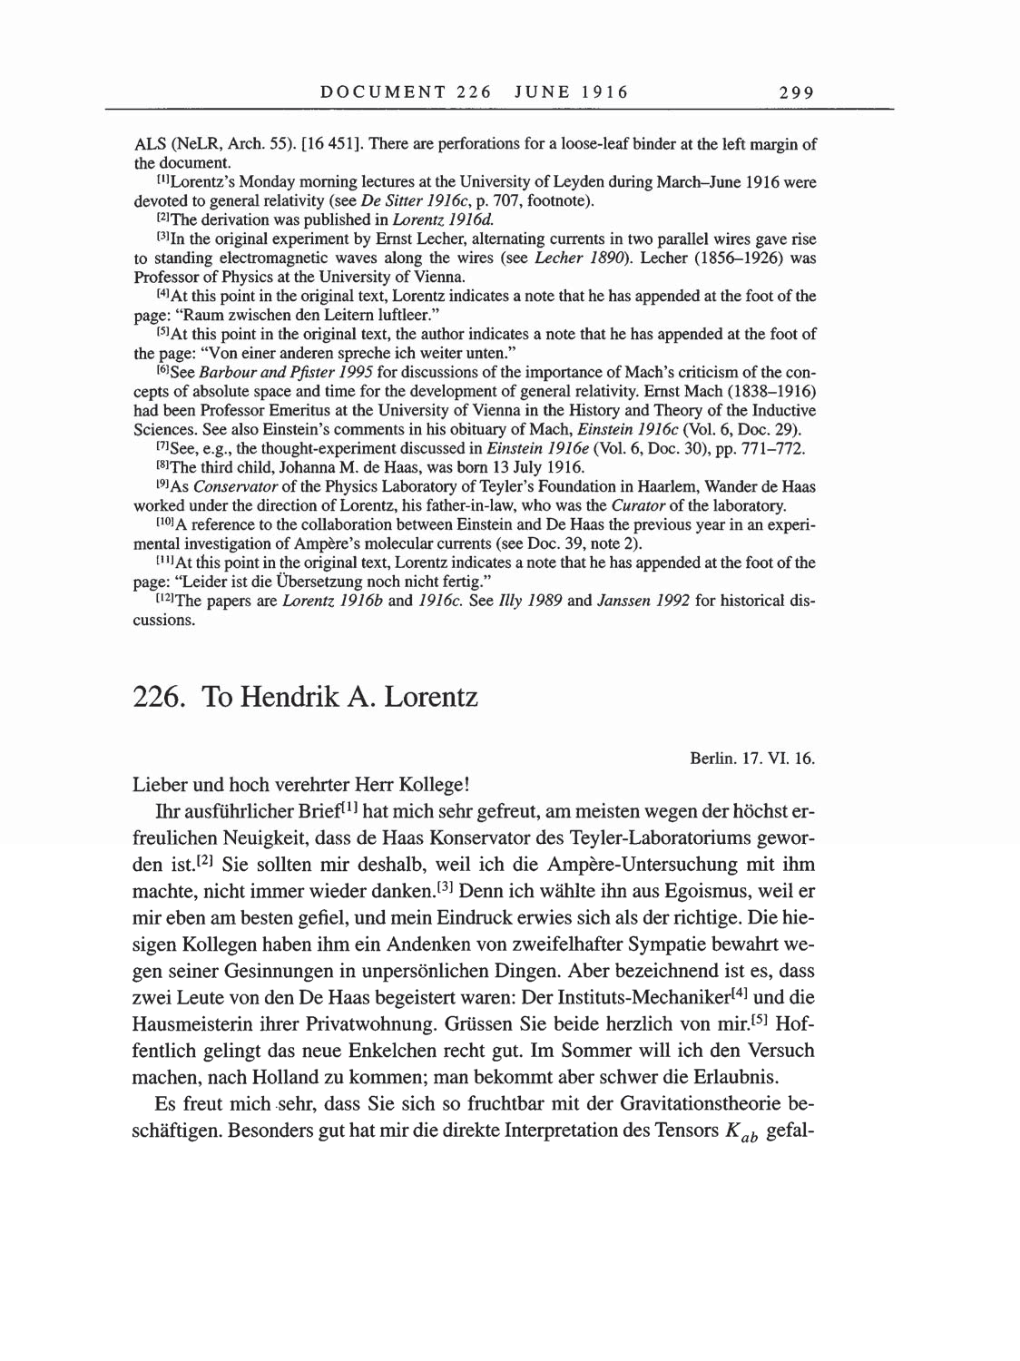 Volume 8, Part A: The Berlin Years: Correspondence 1914-1917 page 299